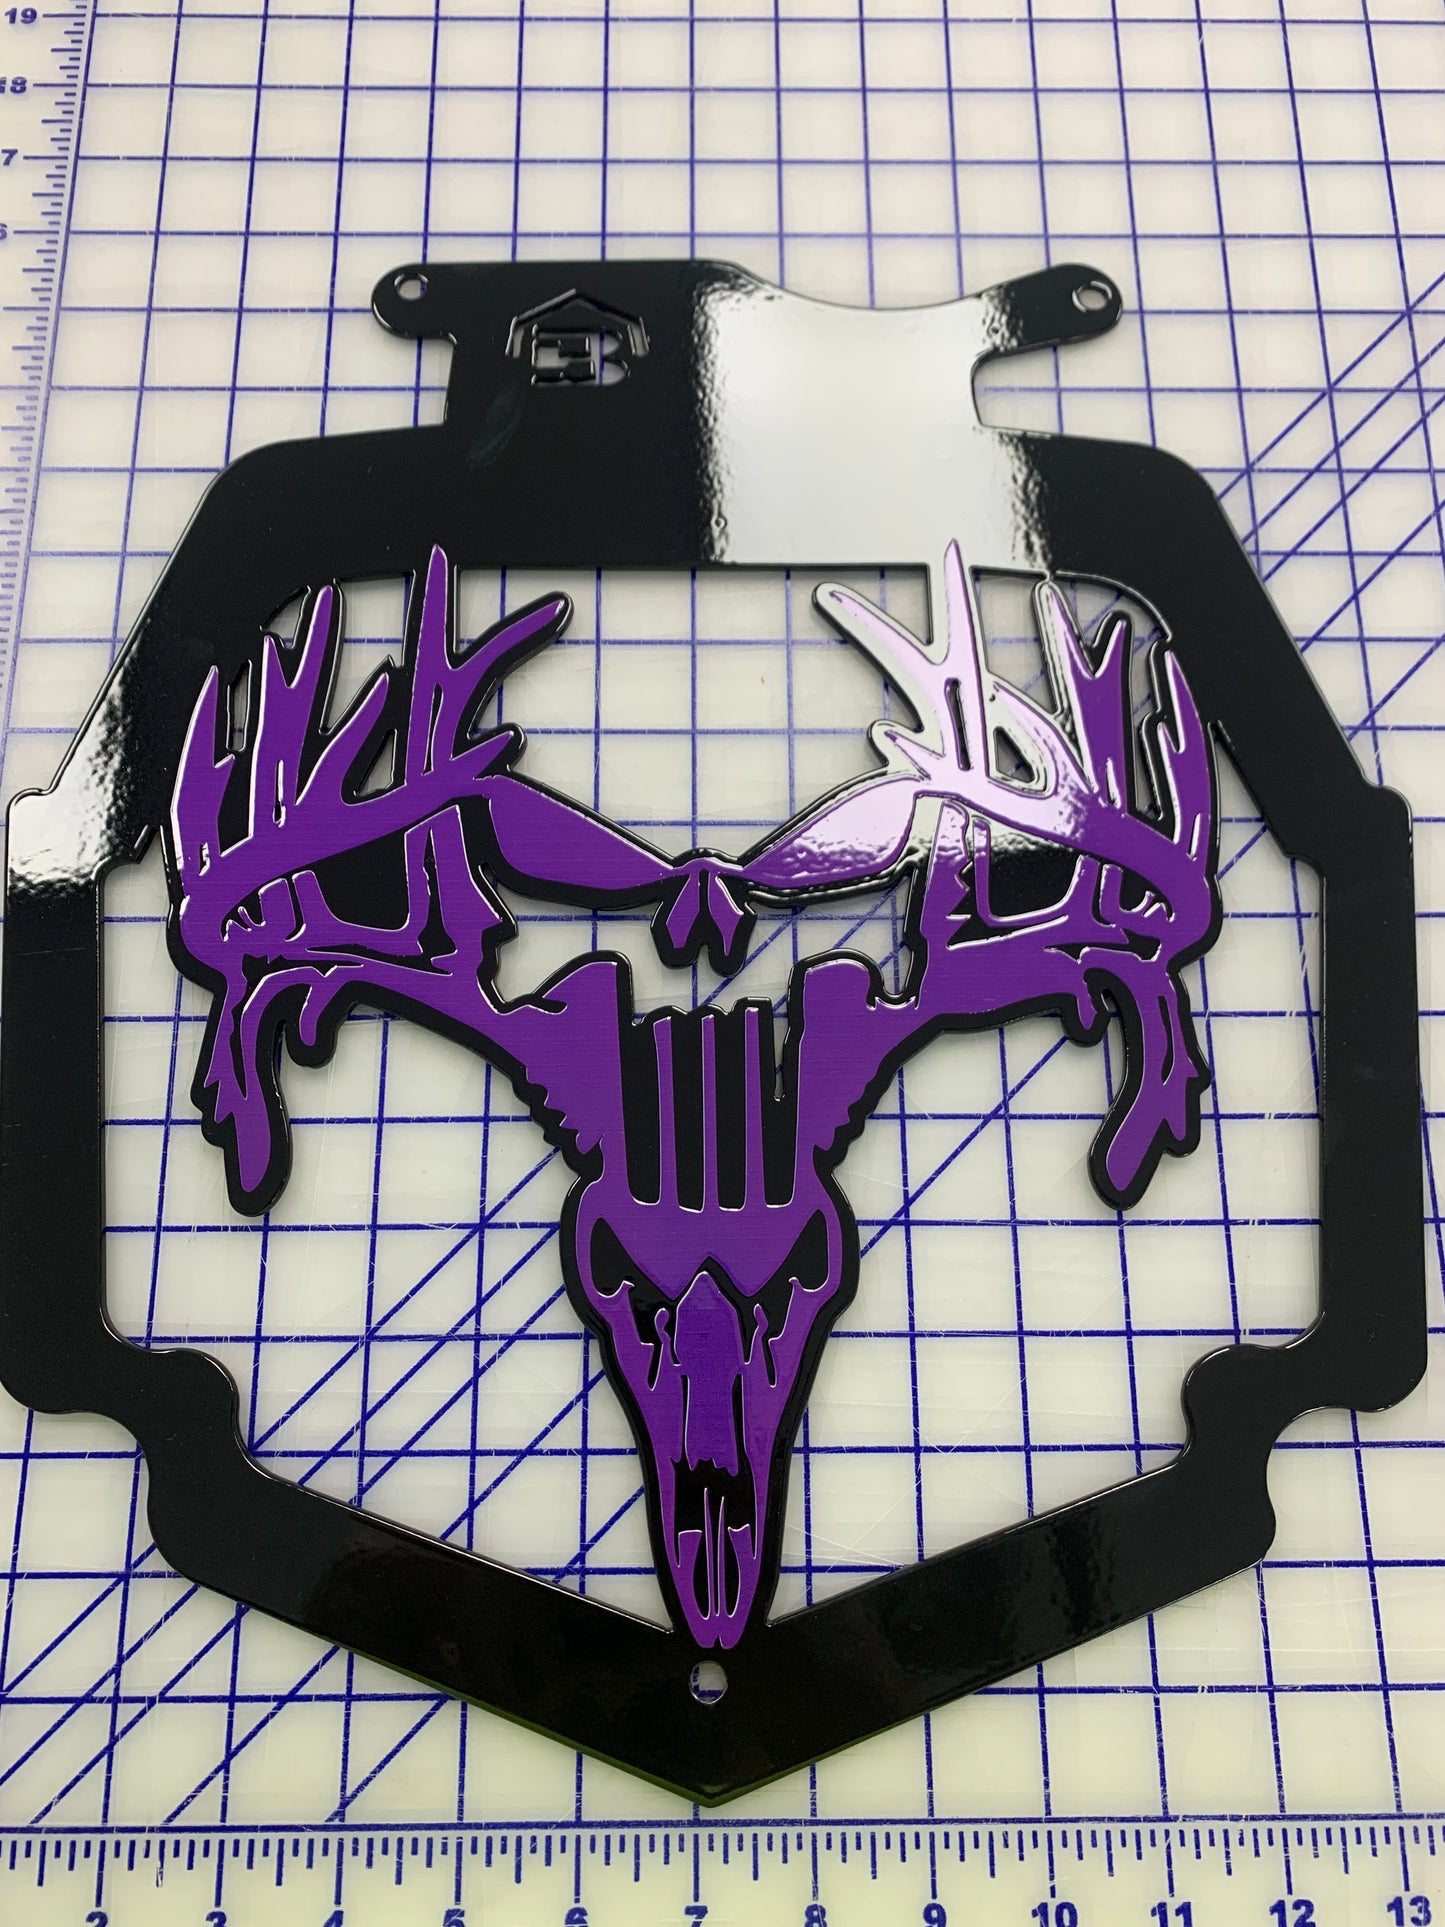 Deer and Skull Radiator cover fits Can Am Outlander Max XMR 450 570 650 850 1000 - Your Color Choices